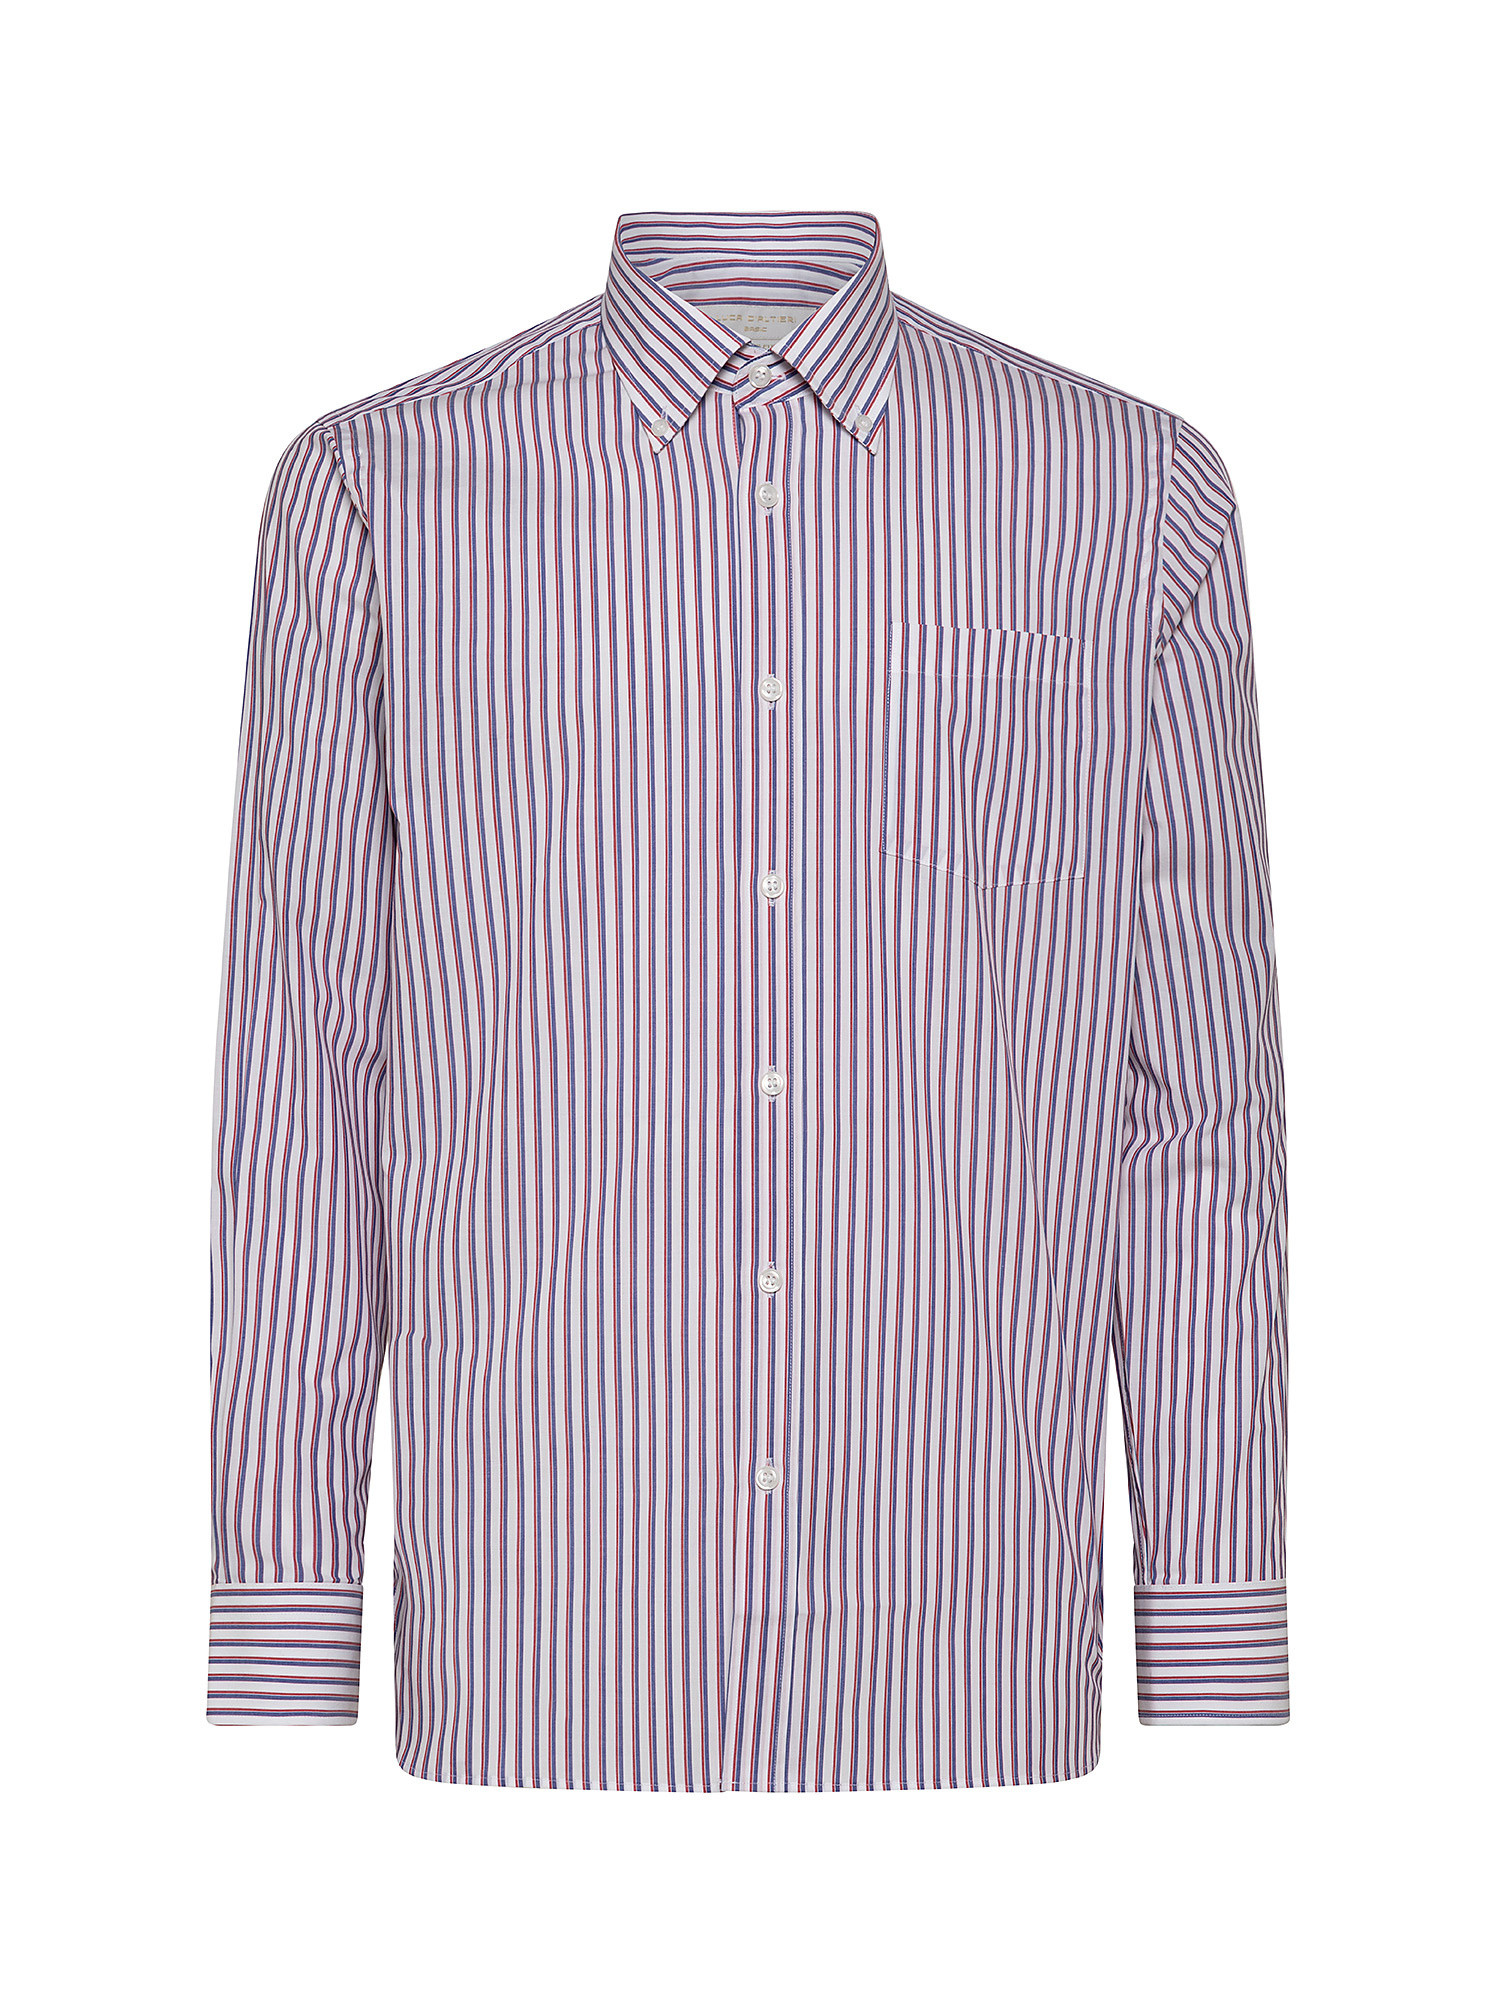 Tailor fit shirt in striped poplin cotton, Multicolor, large image number 0